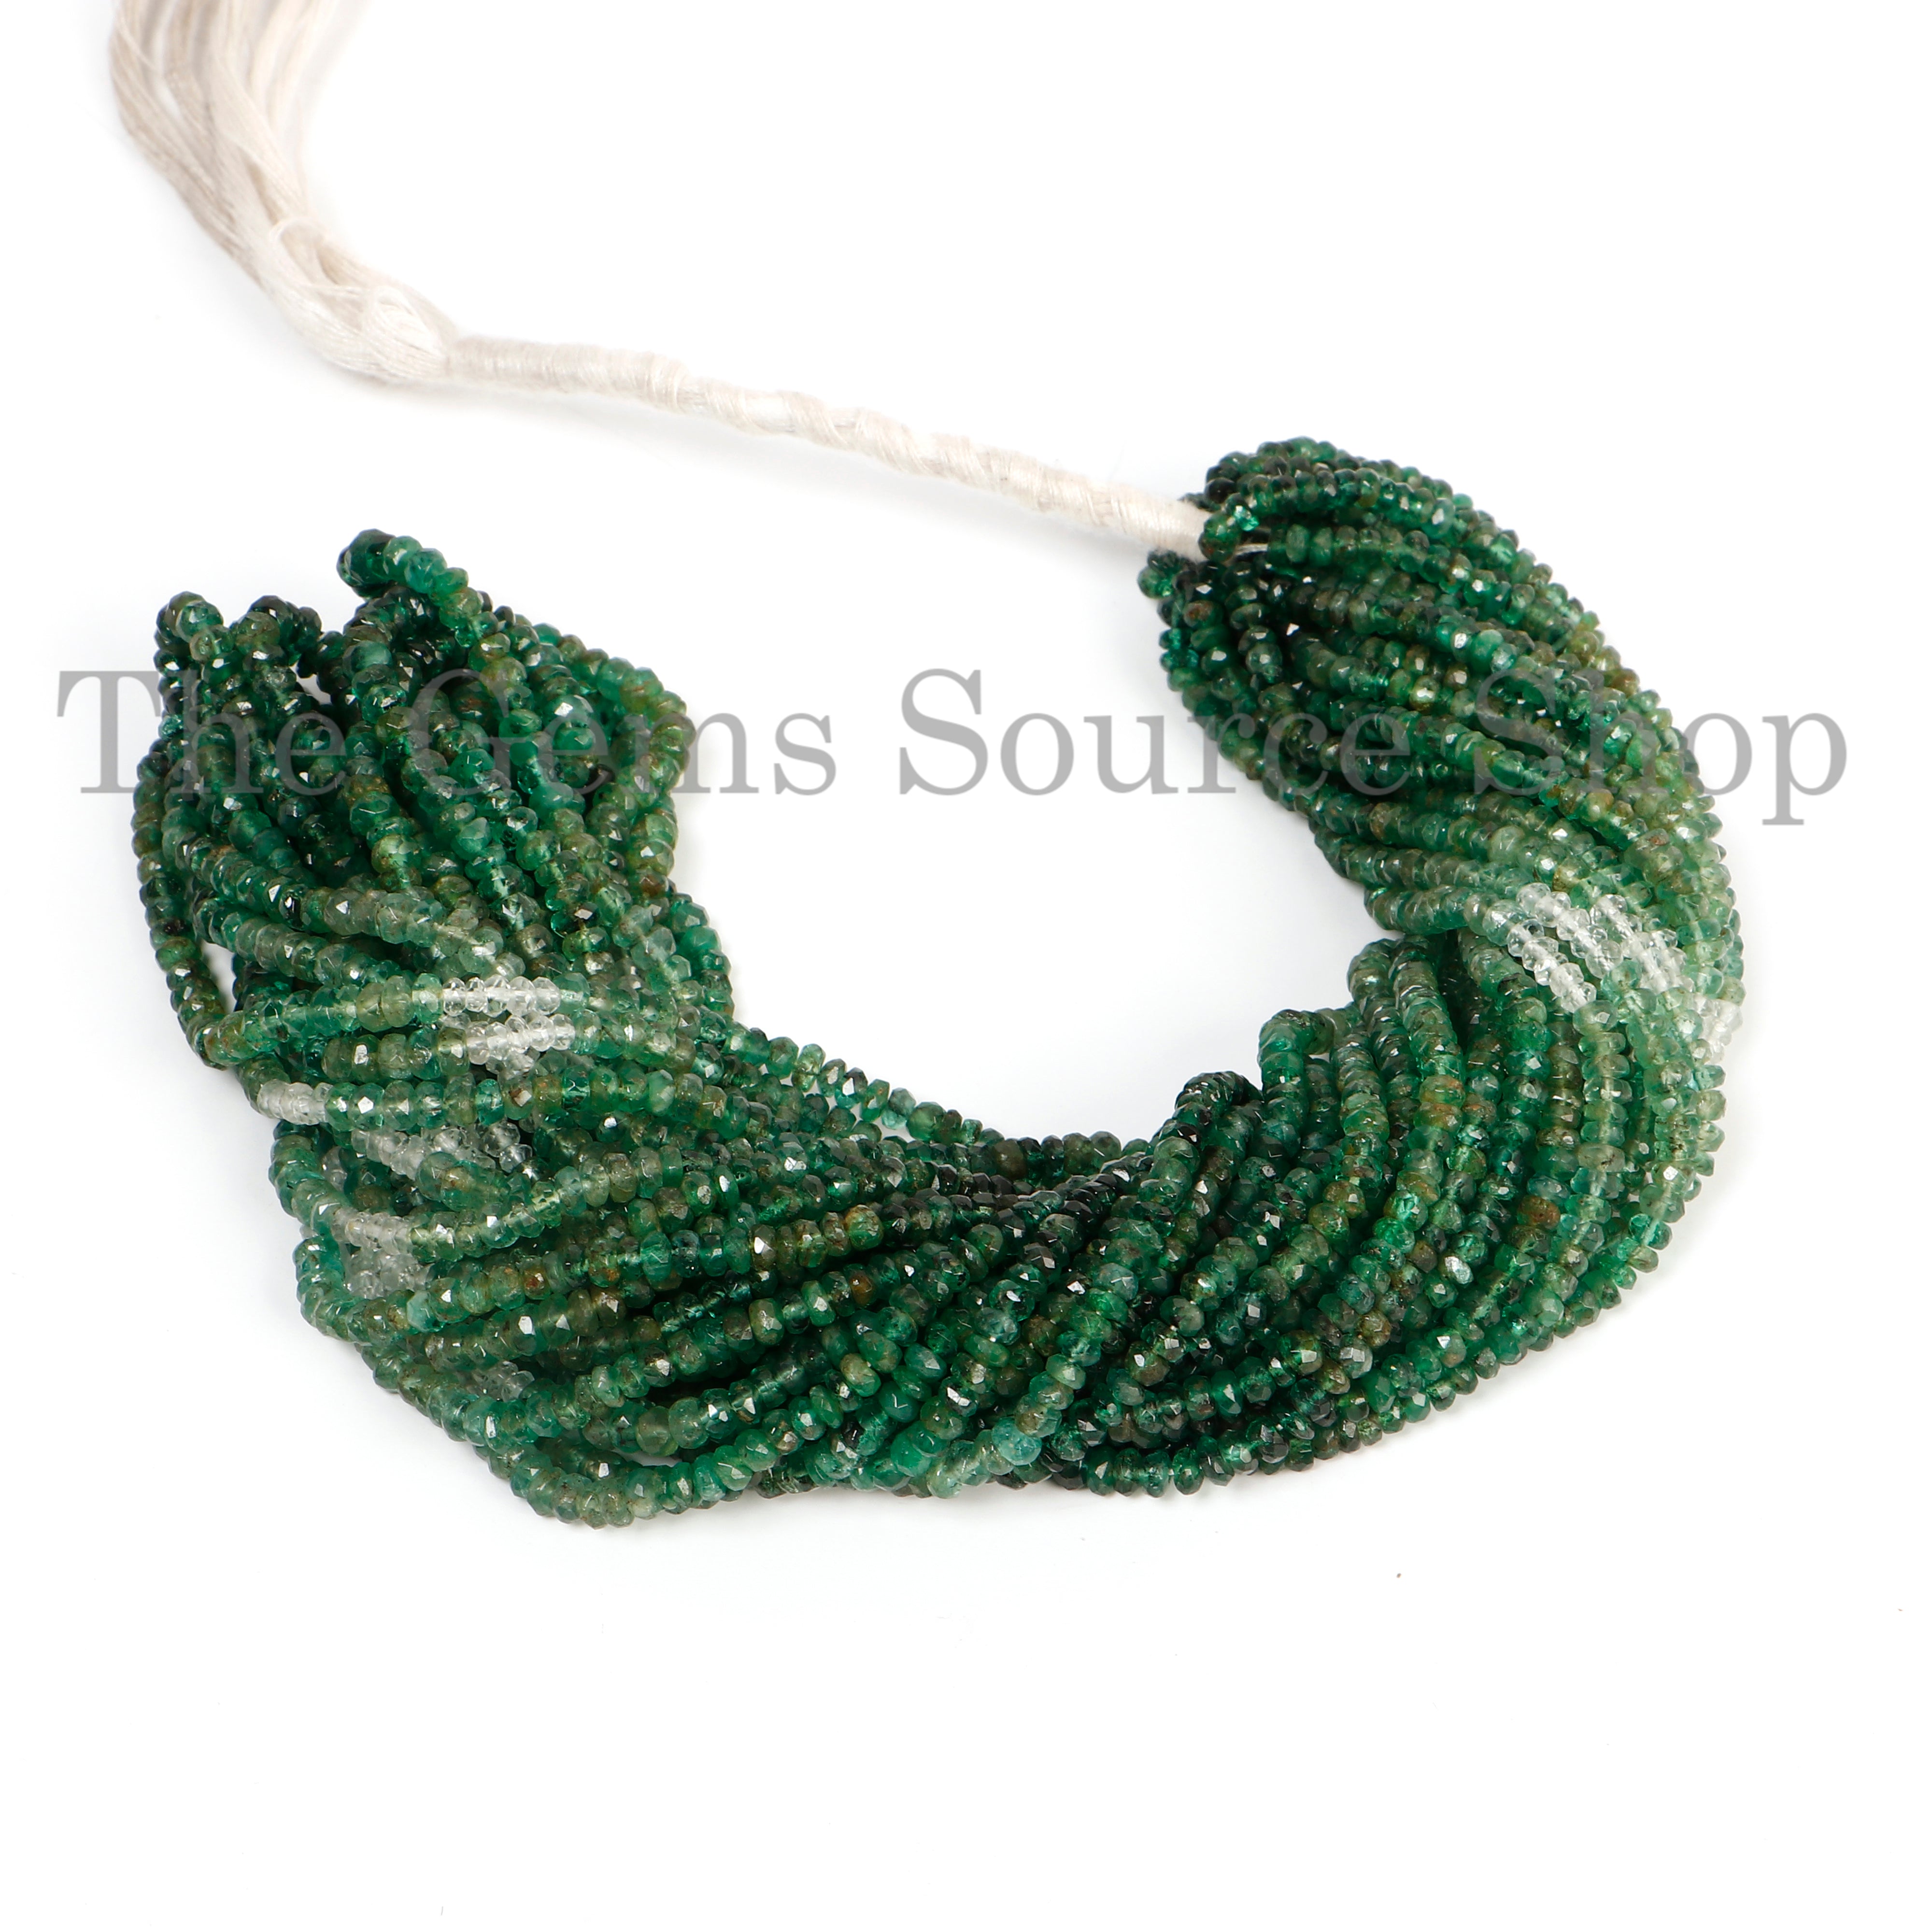 Shaded Emerald Beads, Emerald Faceted Beads, Emerald Rondelle Beads, Emerald Gemstone Beads